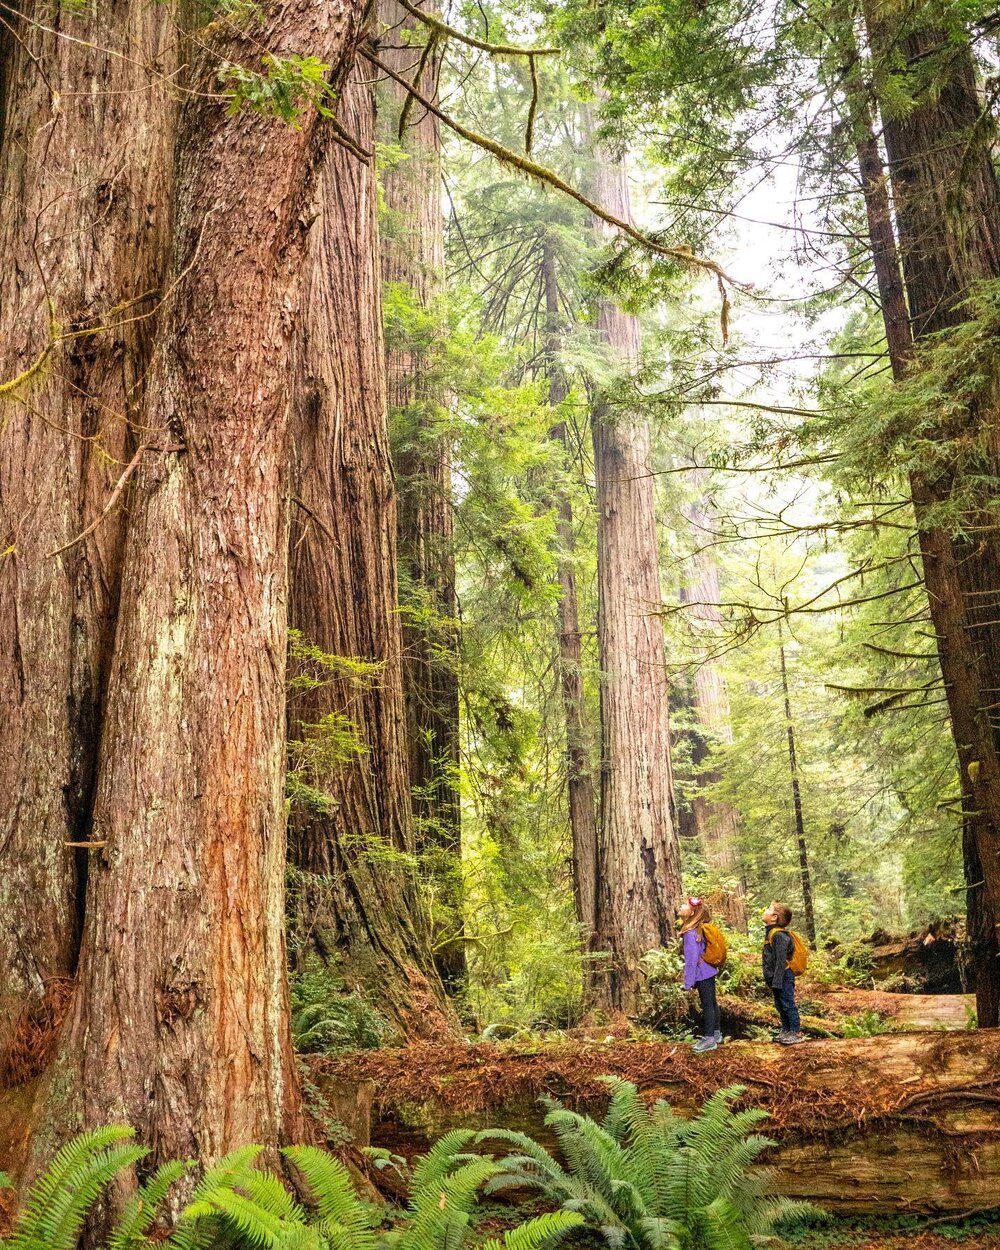 🌲Redwood National Park 🌲

📌 Save this post 📌 

Something I miss the most from the USA are these trees. The giant redwoods in California are some of the most awe inspiring parts of nature. While there are many places to see Redwoods in CA, you won